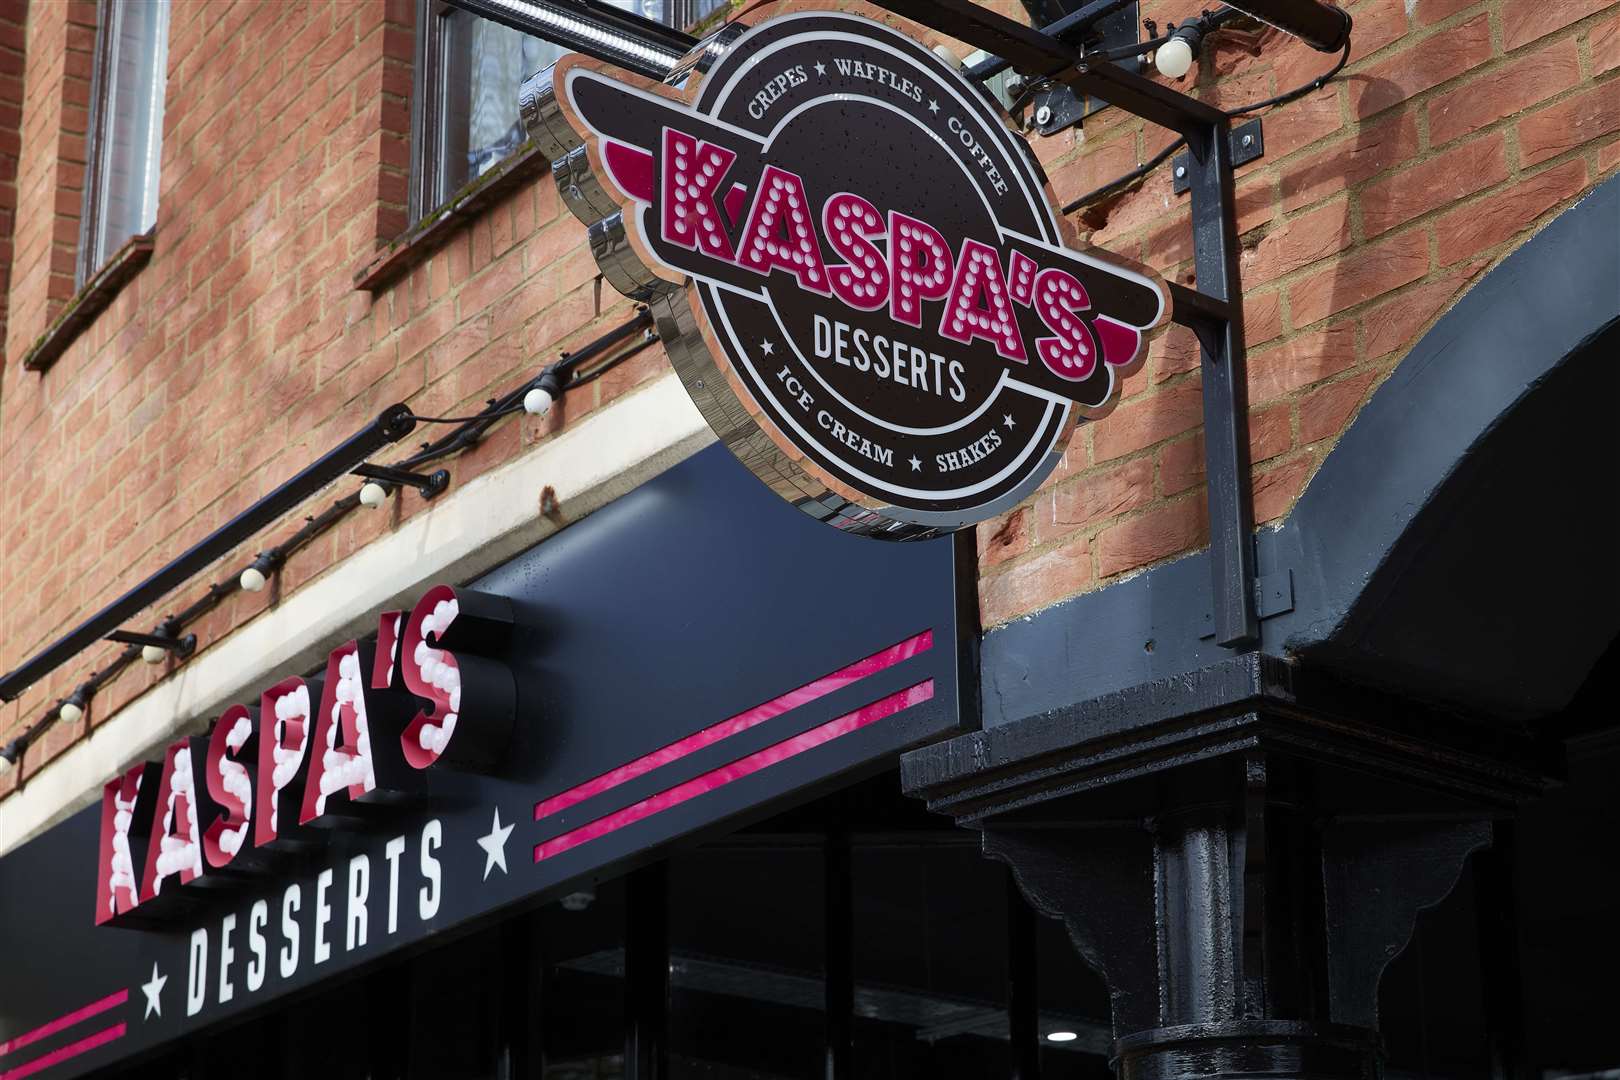 Kaspa's Desserts is co-owned by the businessman and a rapidly growing company